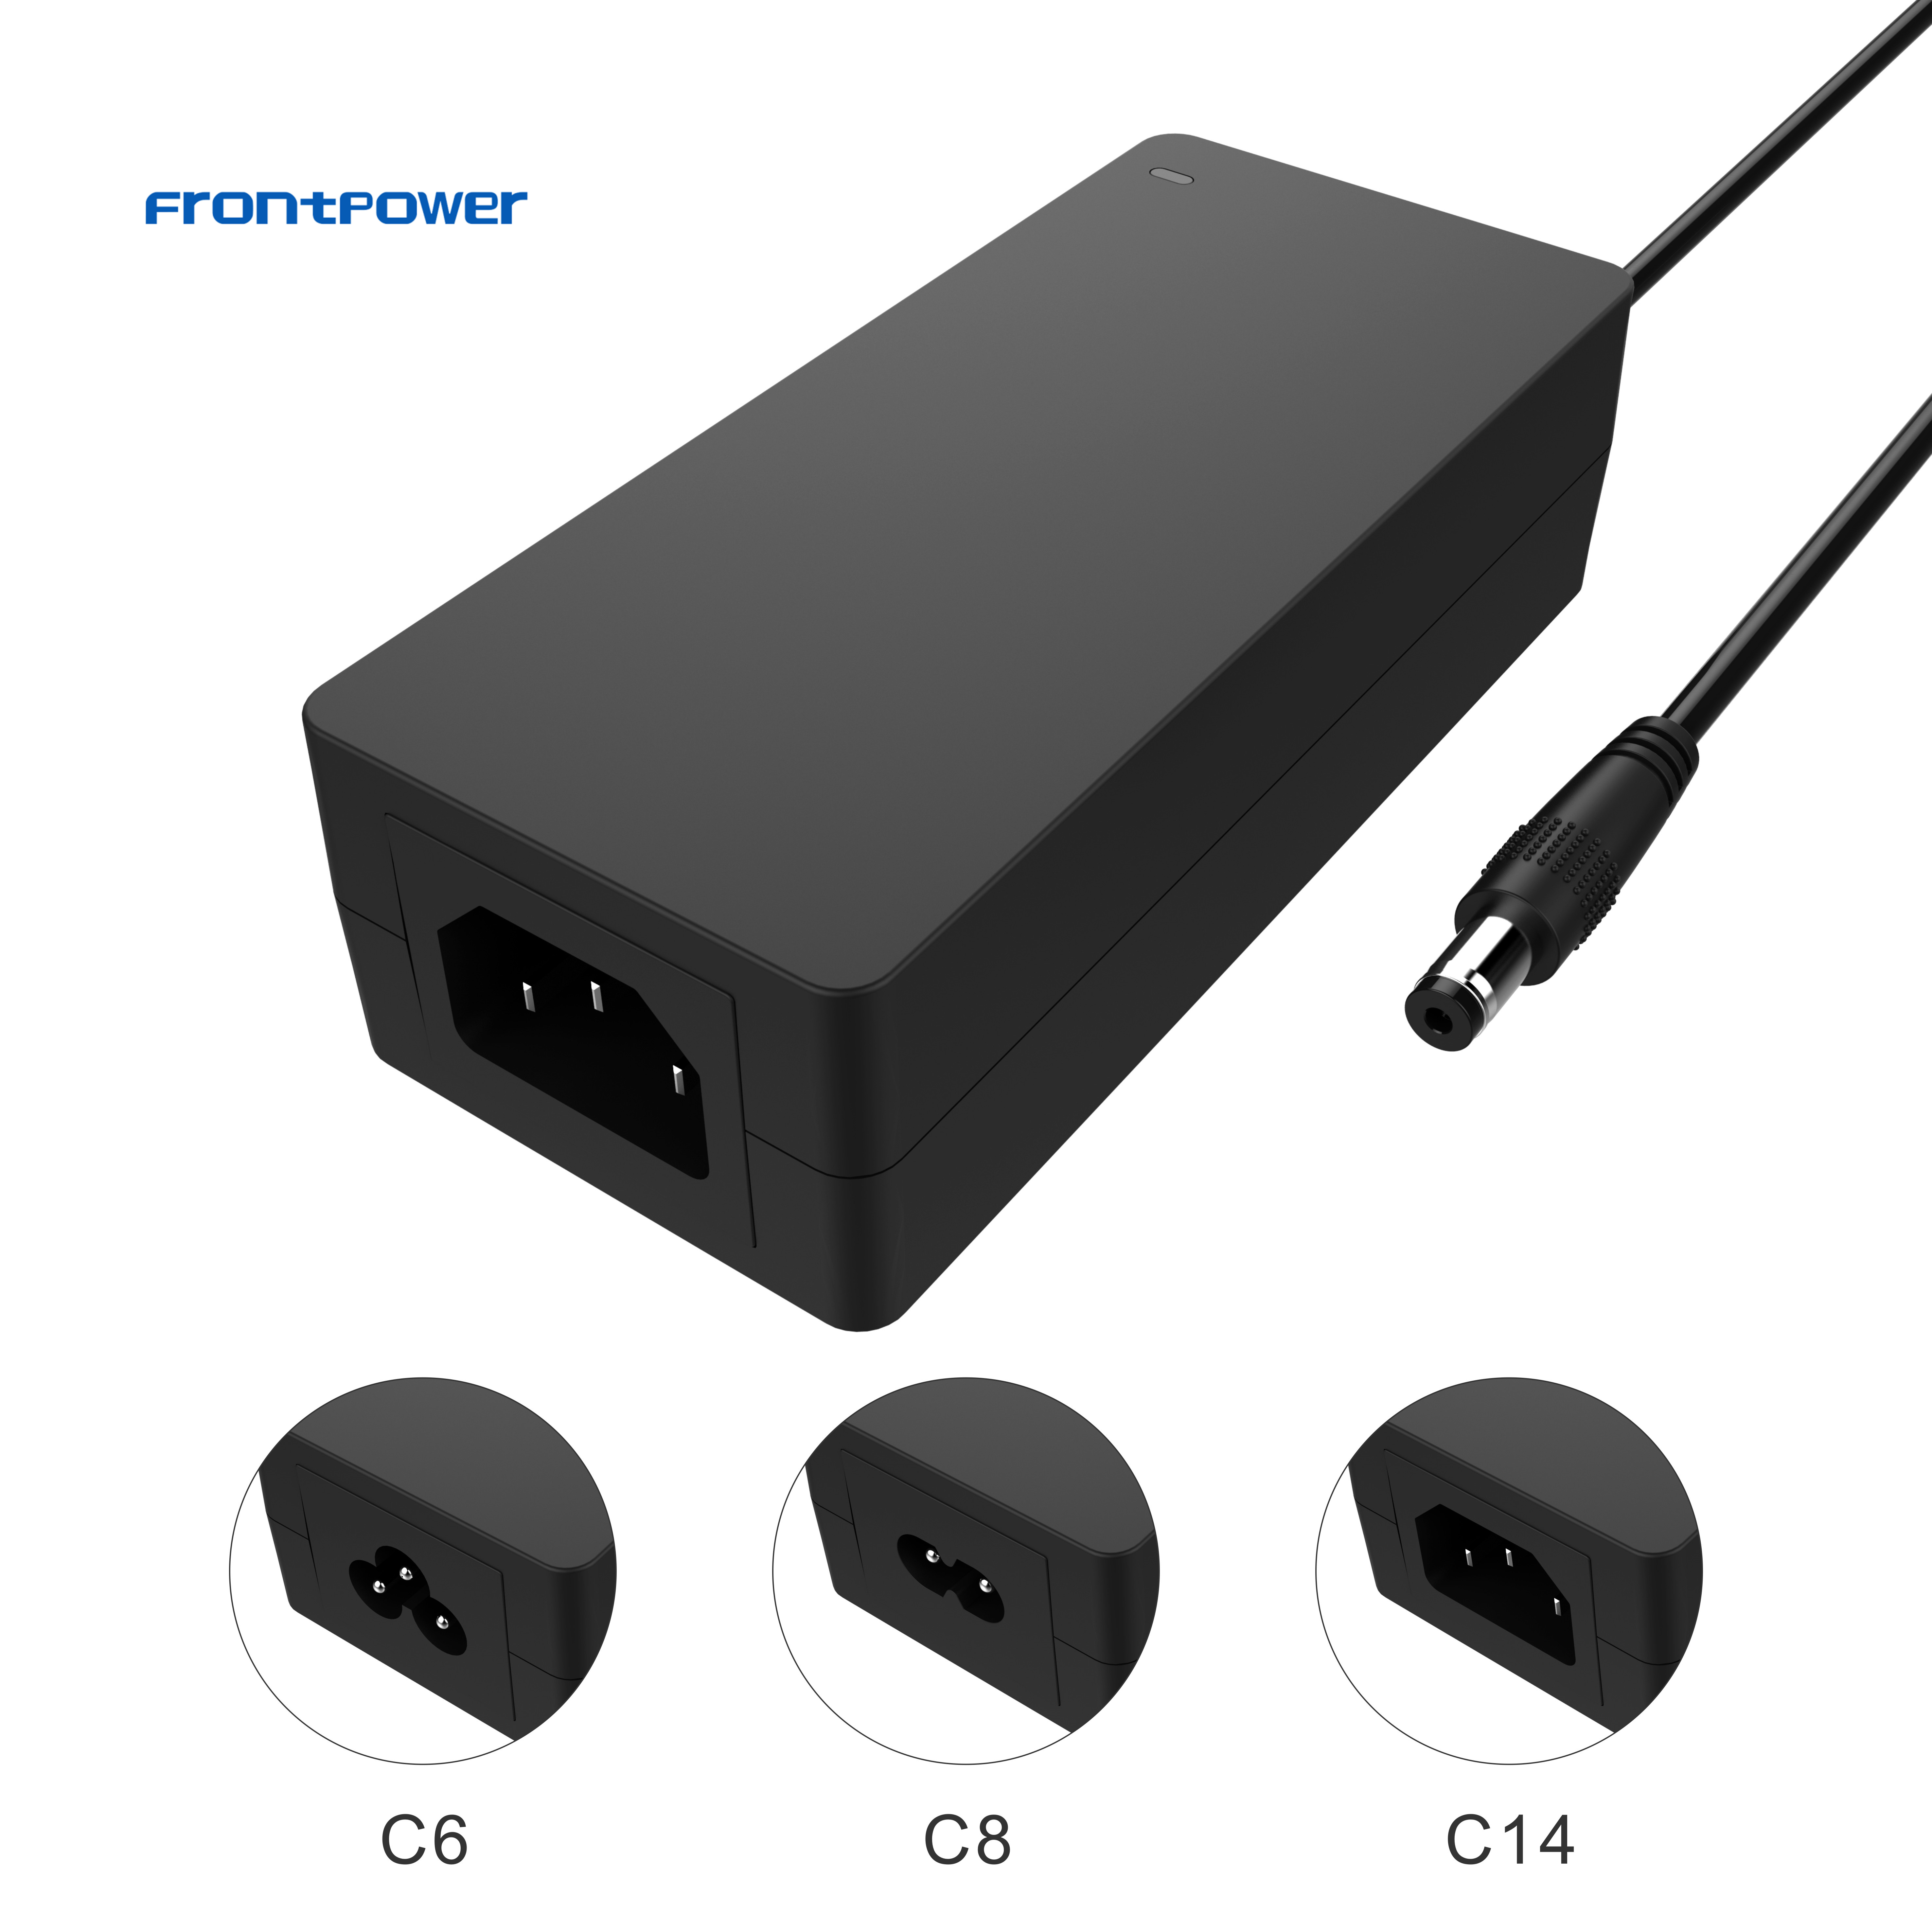 65W table type 12V 5A power adapter with UL ETL1310 FCC CE GS SAA UKCA KC PSE CCC approval for printer